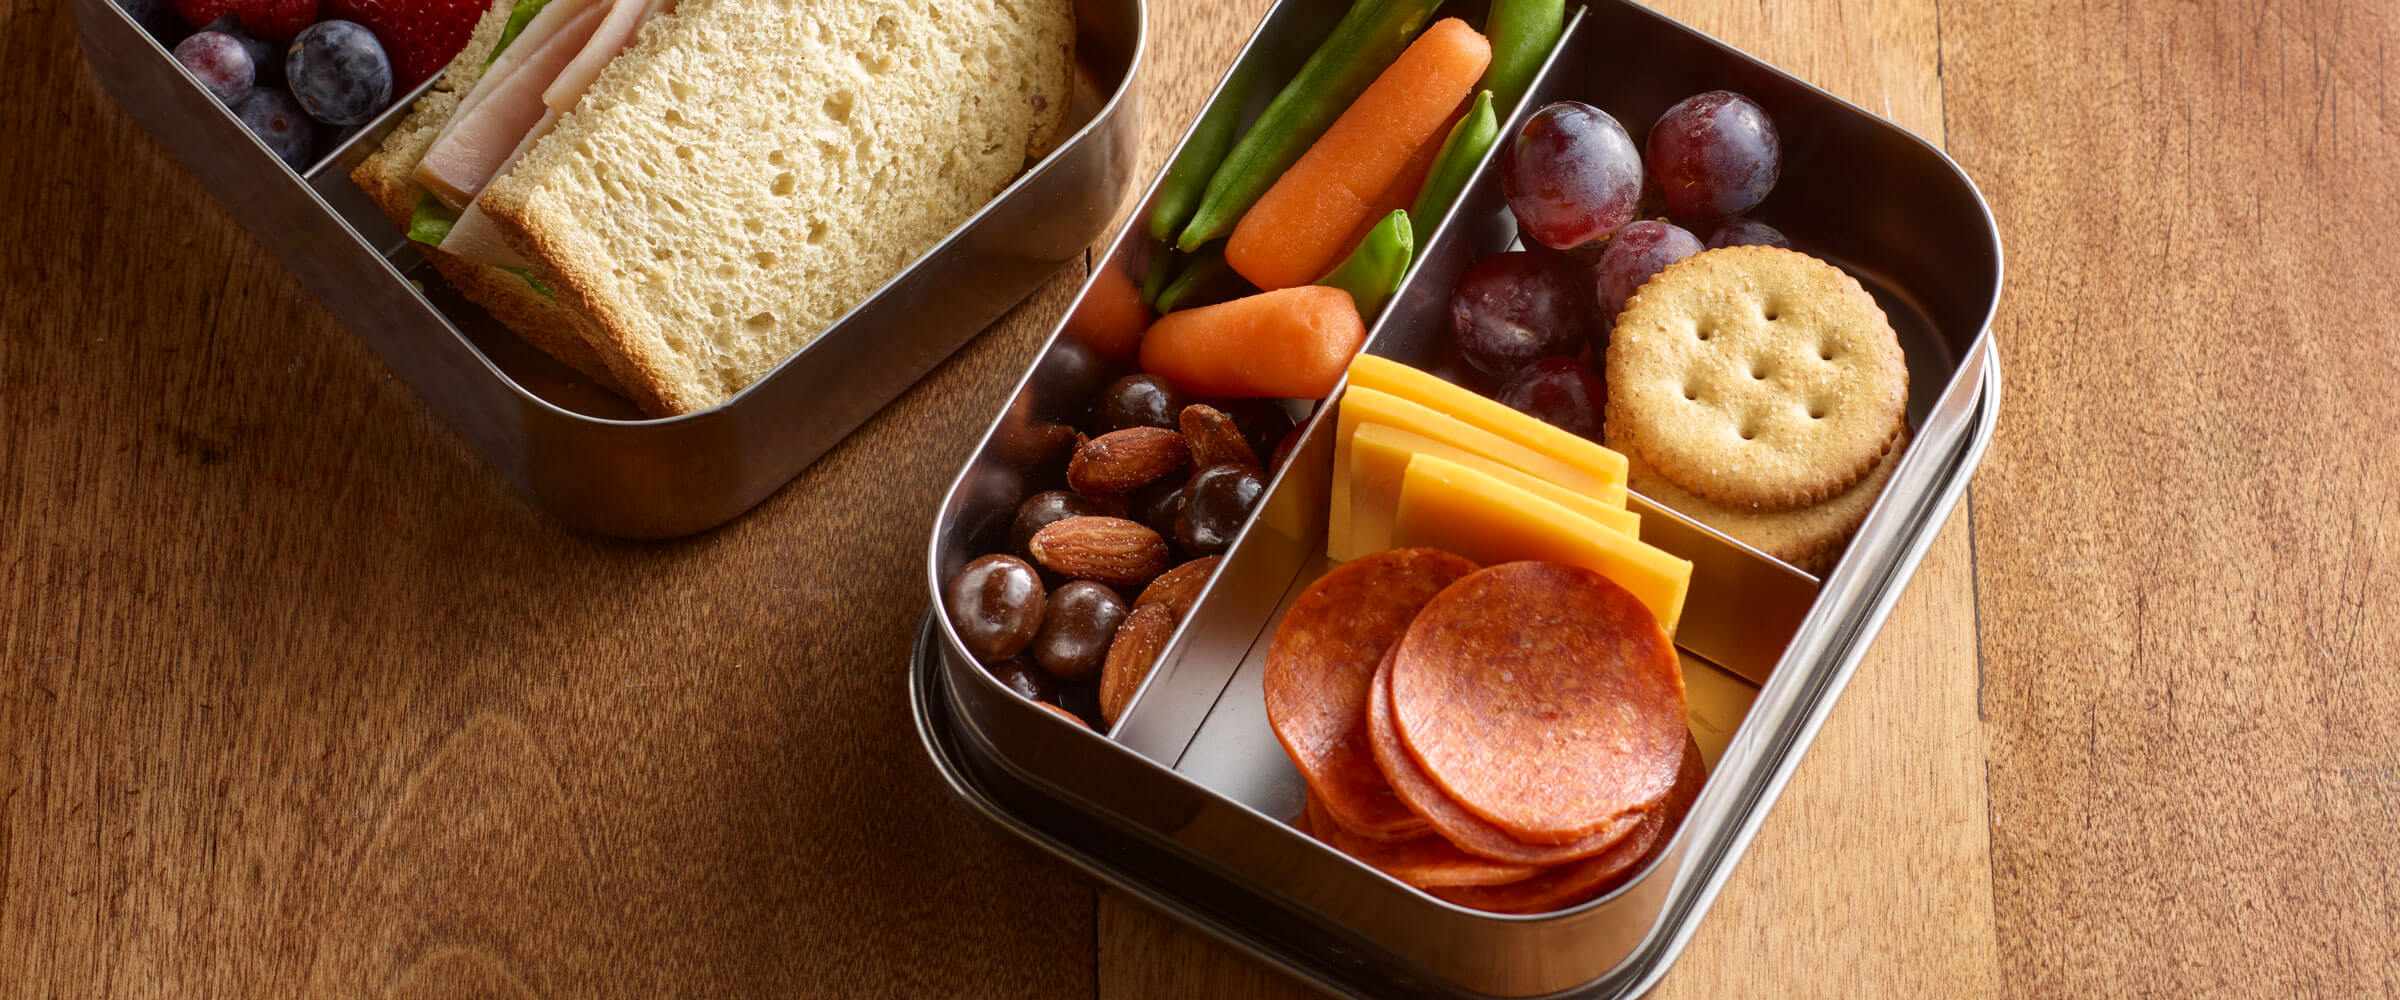 Pepperoni Bento Boxes with cheese, crackers, grapes, veggies and nuts on wooded table